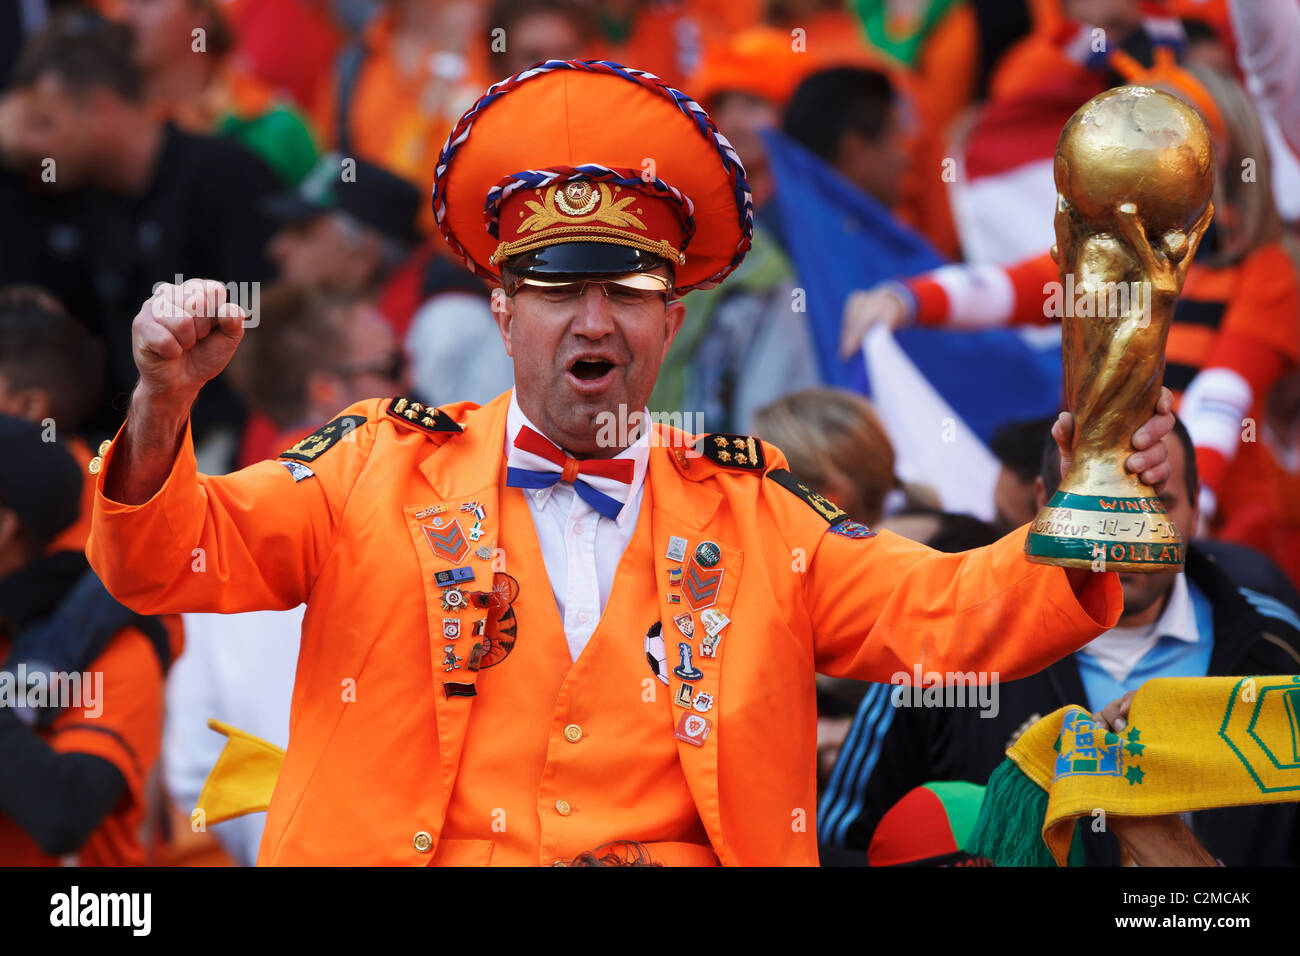 A Holland supporter cheers while holding a replica trophy at a 2010 World Cup football match between the Netherlands and Denmark Stock Photo